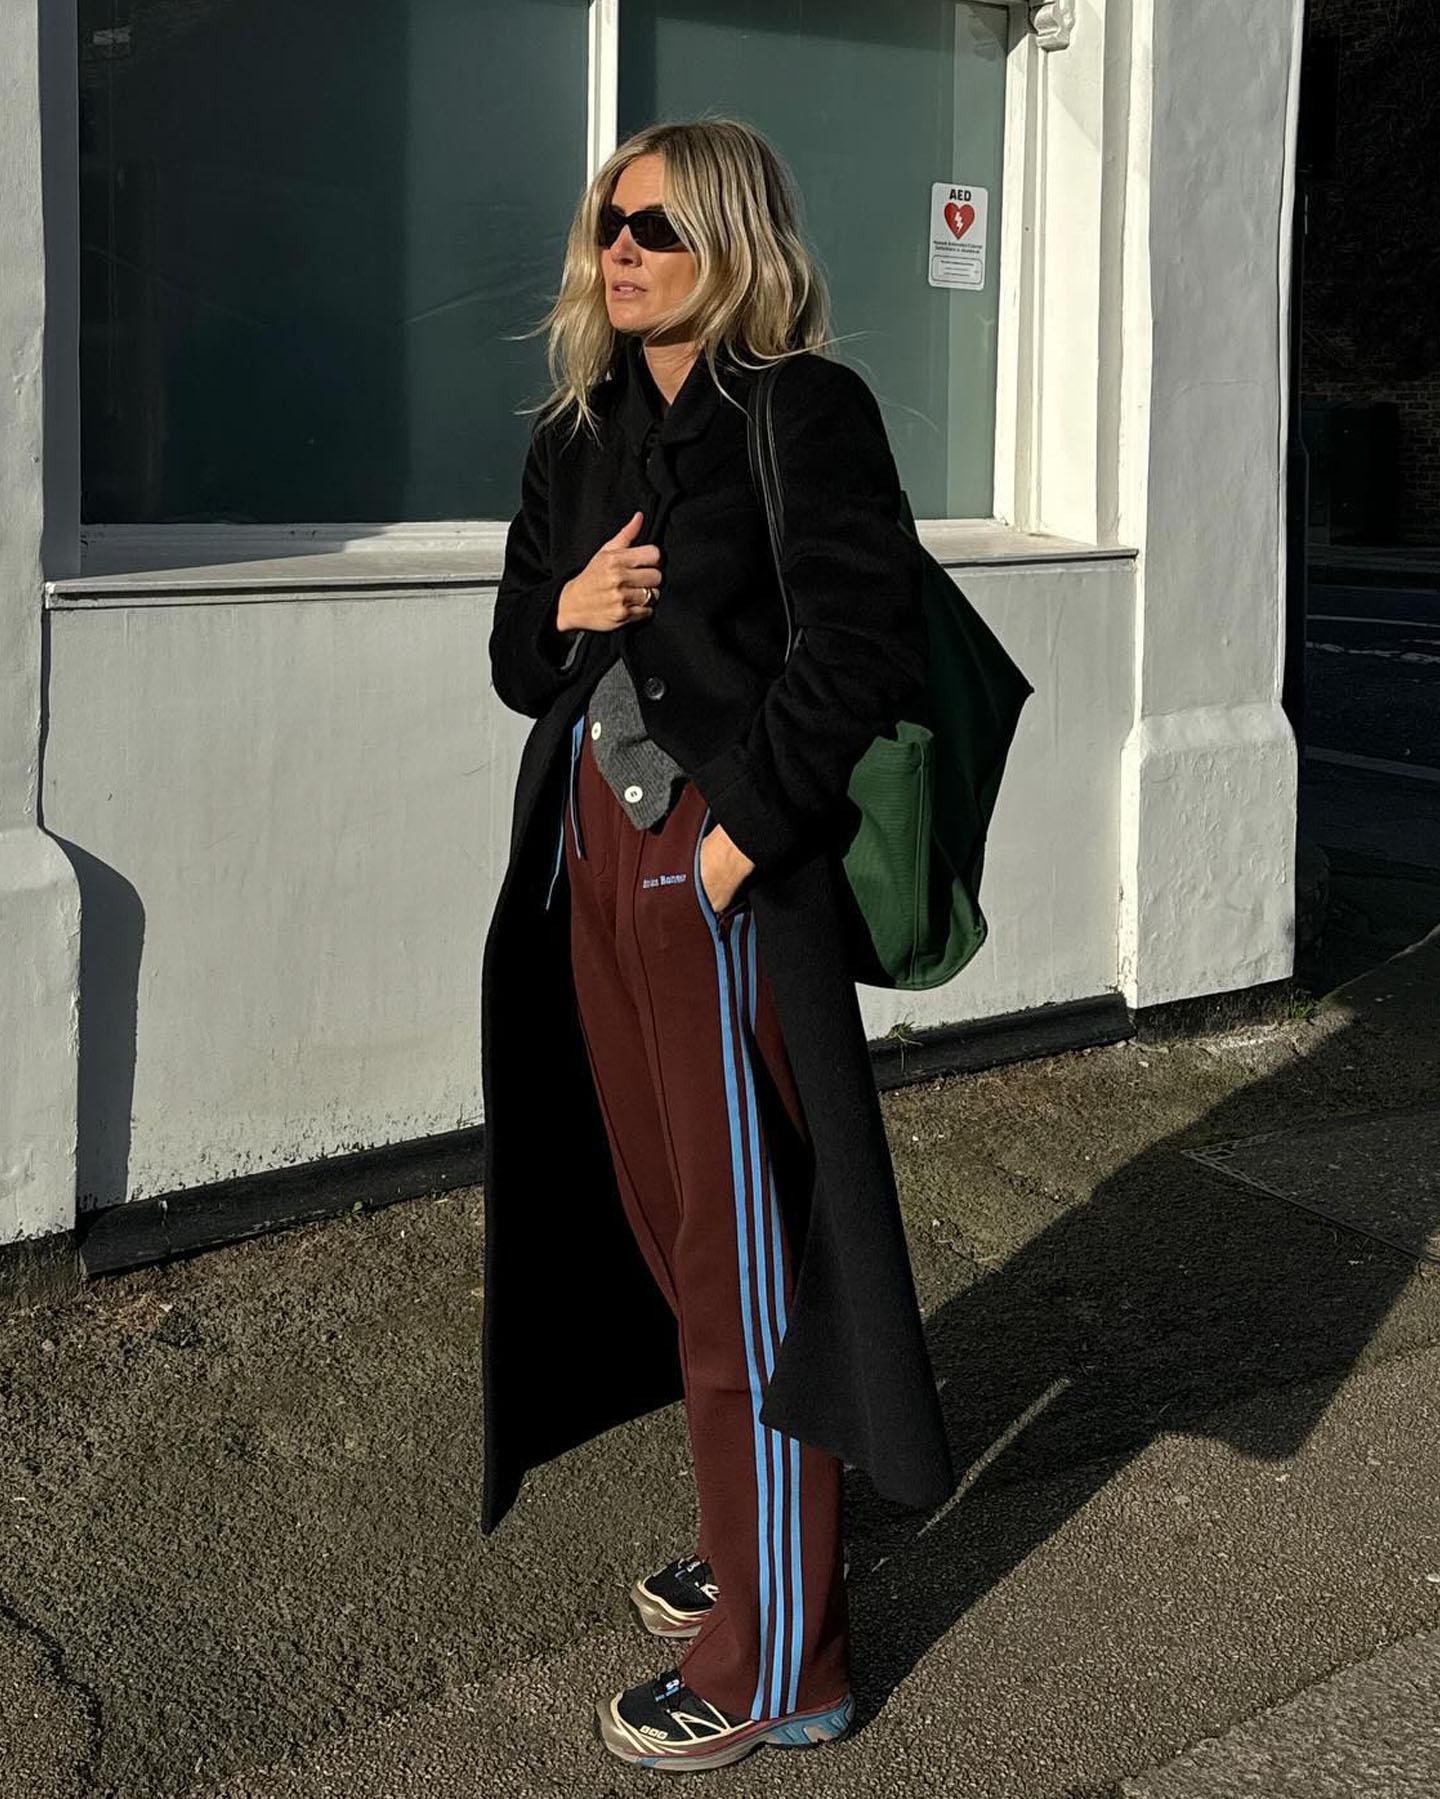 British fashion influencer Lucy Williams poses on the sidewalk in London wearing a long black coat, gray cardigan, Adidas Wales Bonner brown and blue track pants, green The Row tote bag, and Salomon sneakers